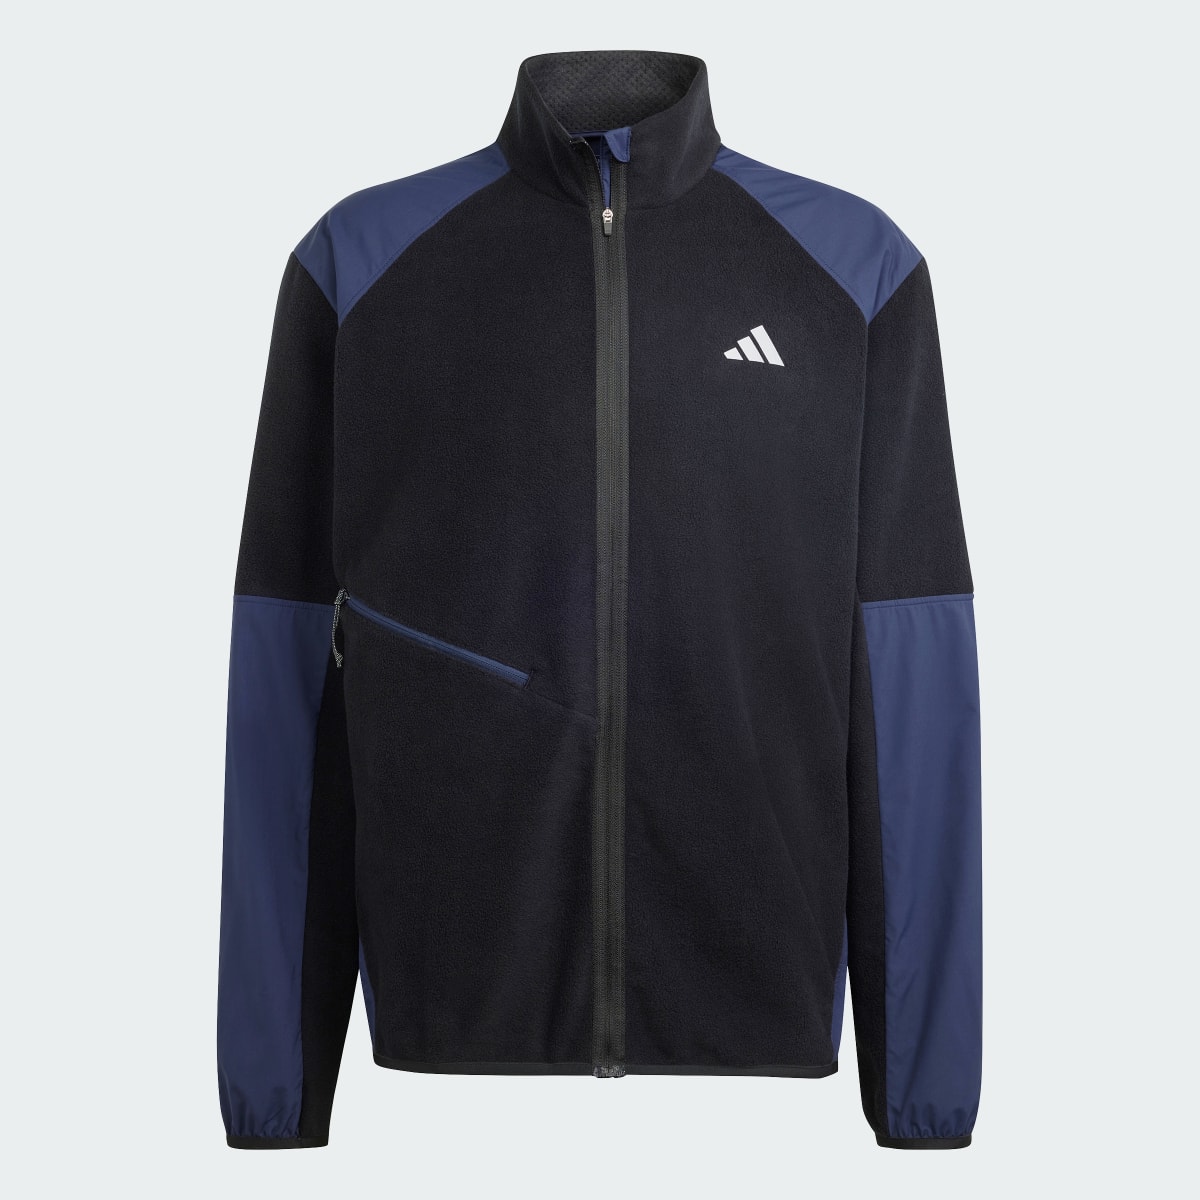 Adidas Ultimate Running Conquer the Elements Jacke. 5